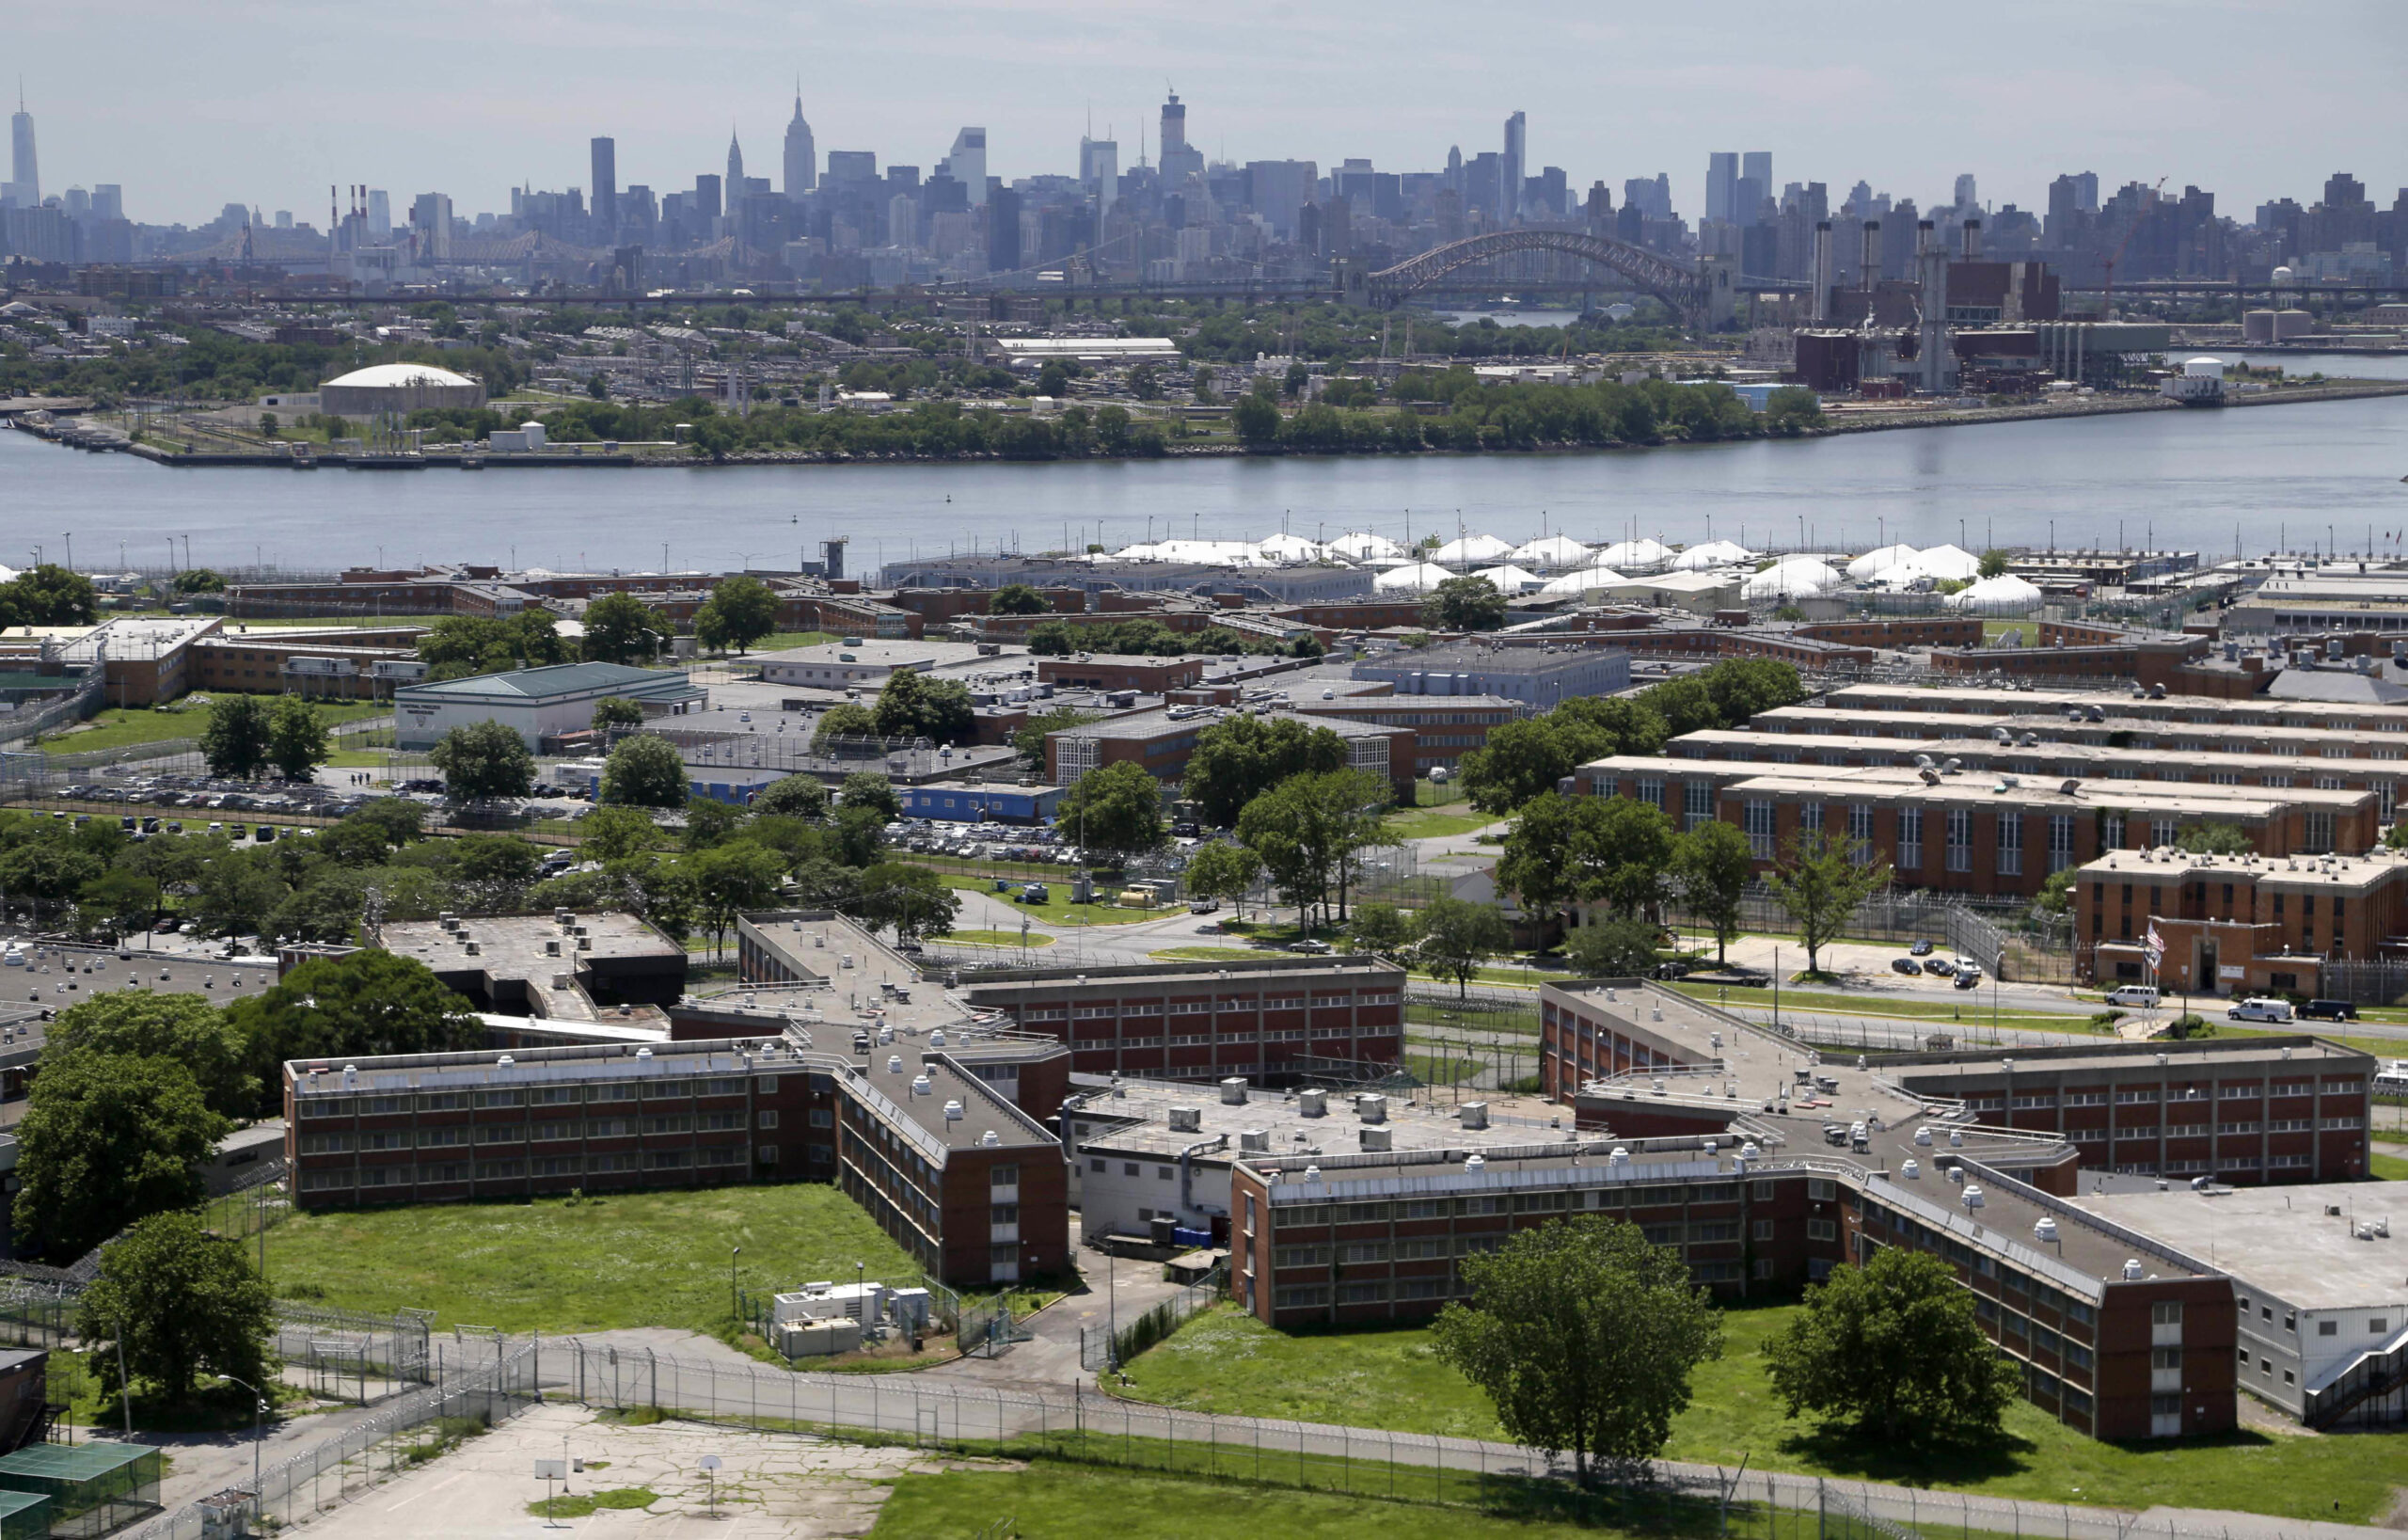 Rikers Island, where solitary confinement practices have come under intense scrutiny and prompted calls for reform following the enactment of Local Law 42.